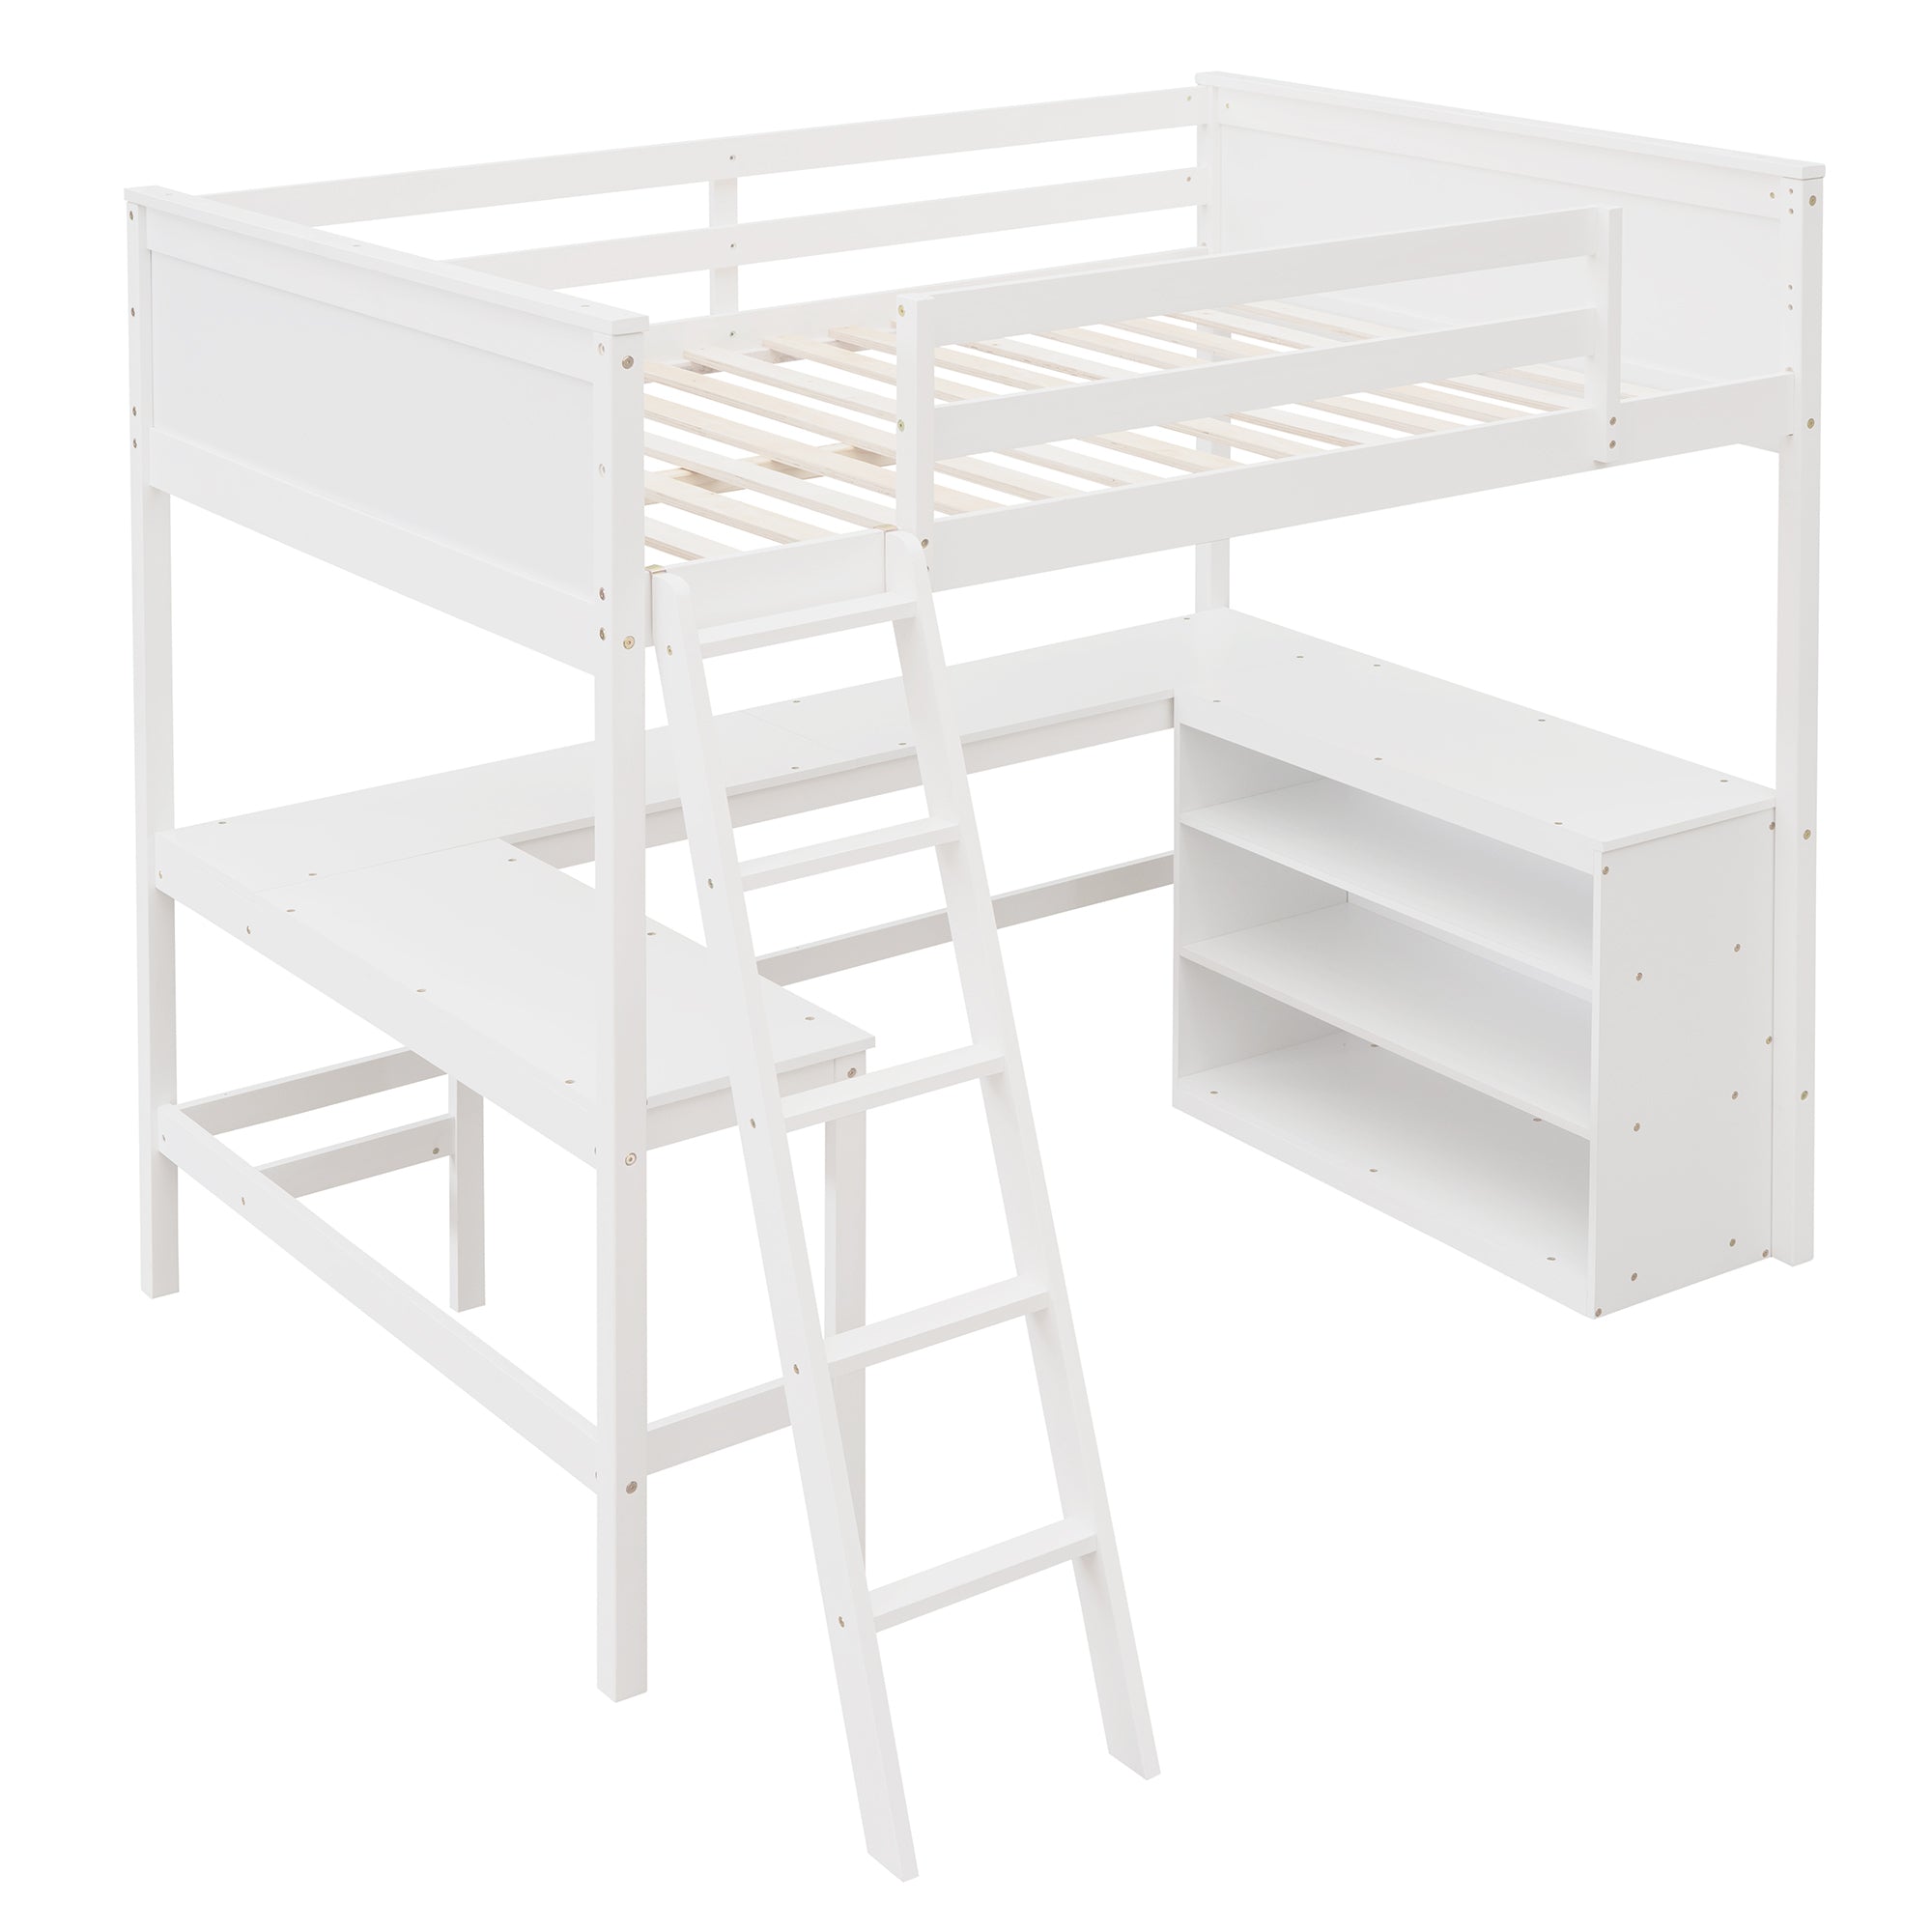 Full size Loft Bed with Shelves and Desk (White)